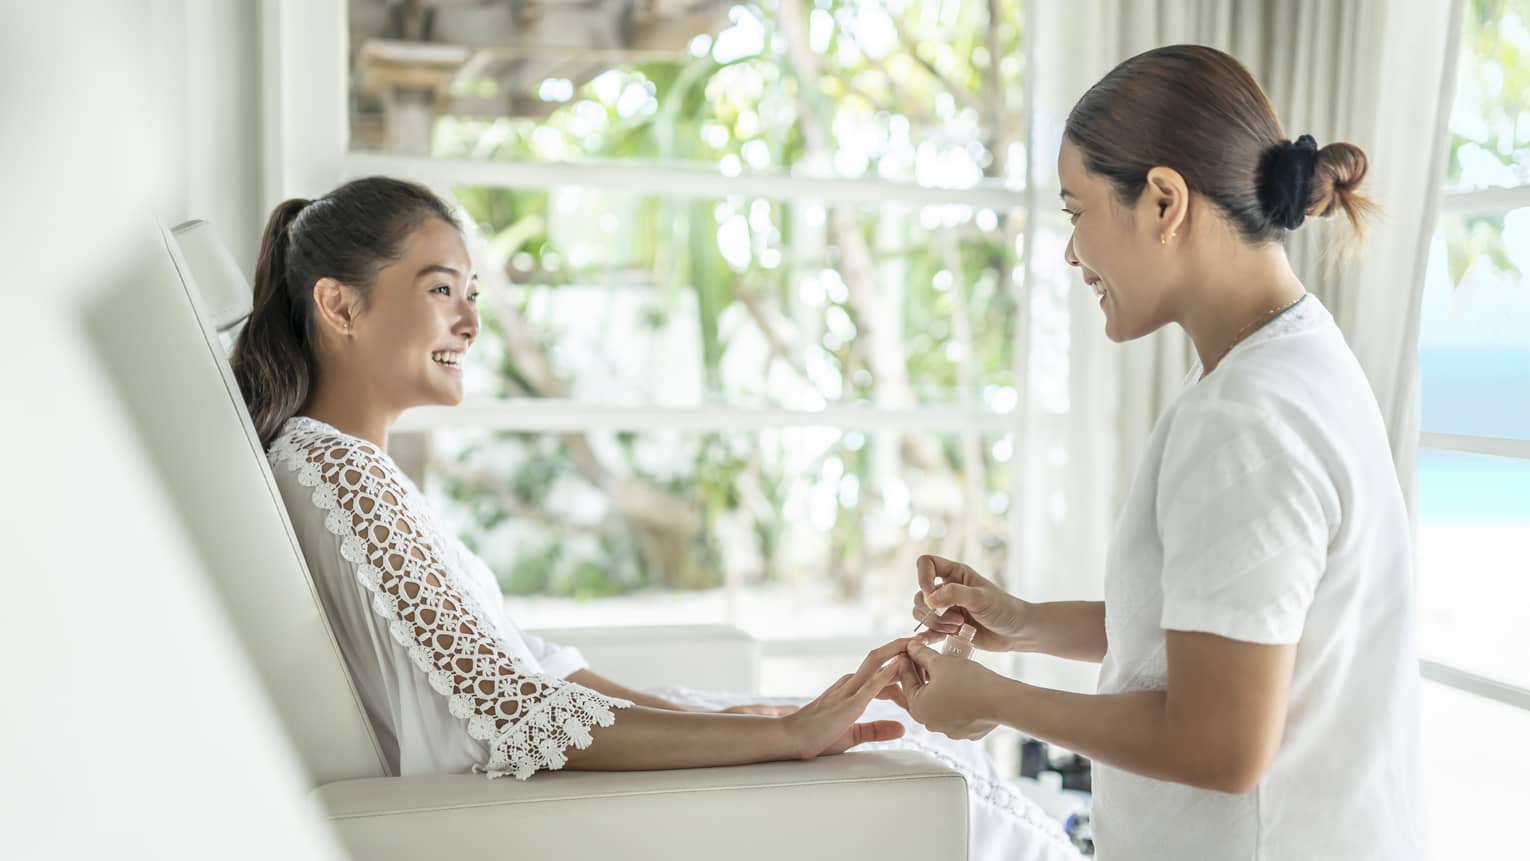 Woman sitting in white spa chait smiles to woman painting her nails during manicure